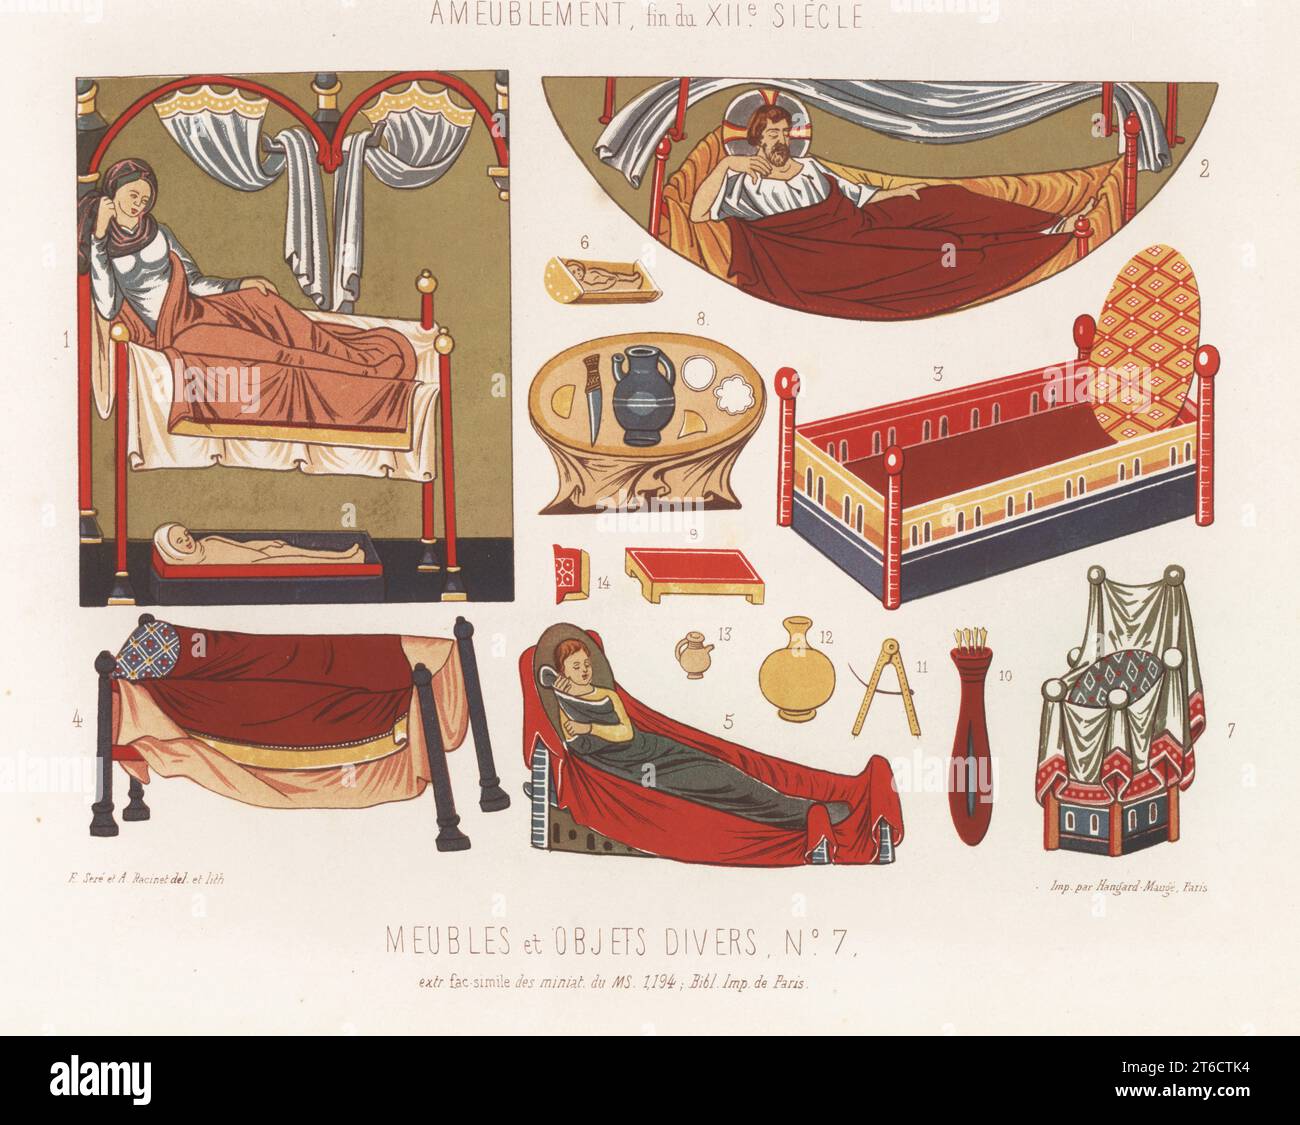 Beds and other furniture, late 12th century. Beds and cots with curtains 1-5, bed with moveable disk 3, desk 6, ceremonial chair 7, table 8, stool 9, quiver 10, stonemason's compass 11, vases 12,13, and fragment of book binding 14. Meubles et objets divers 7, fin du XIIe siecle. Taken from a manuscript Psalterium Cantuariense, Latin 8846, Psautier MS 1194, Bibliotheque Imperiale de Paris. France XIIe Siecle. Chromolithograph drawn and lithographed by Ferdinand Sere and Auguste Racinet from Charles Louandres Les Arts Somptuaires, The Sumptuary Arts, Hangard-Mauge, Paris, 1858. Stock Photo